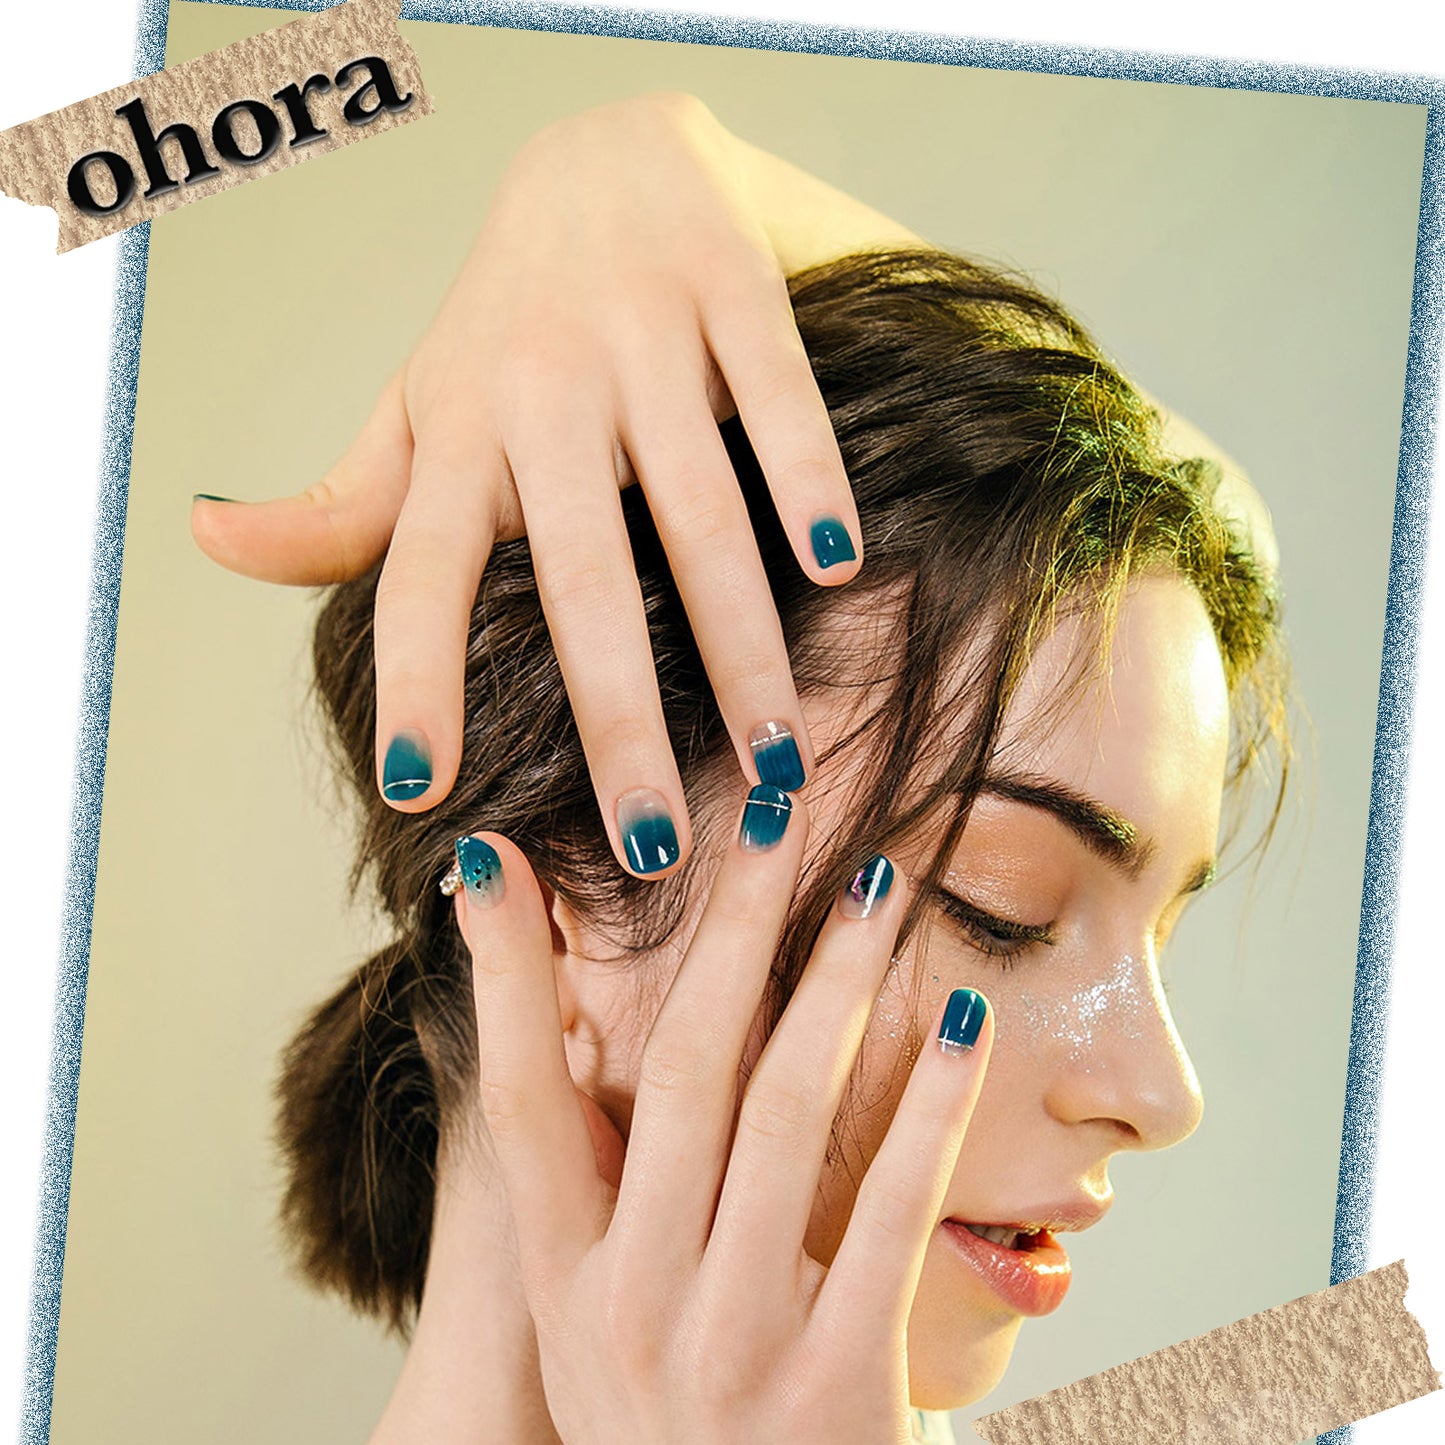 Ohora (N Cool Leisure No. 1 Nails)